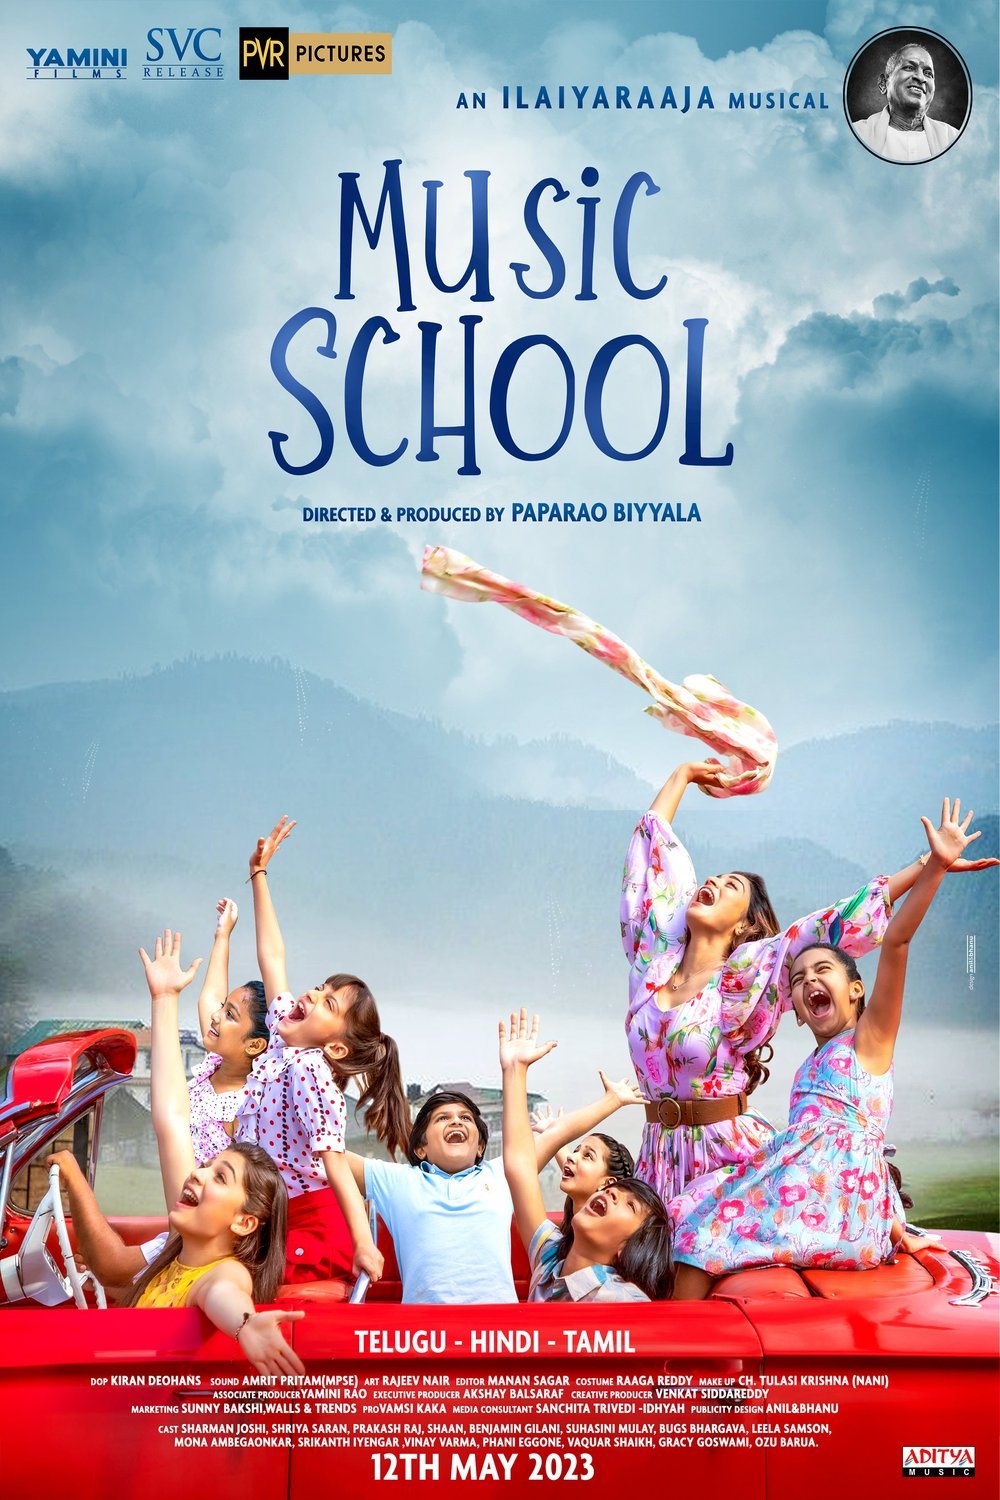 Hindi poster of the movie Music School